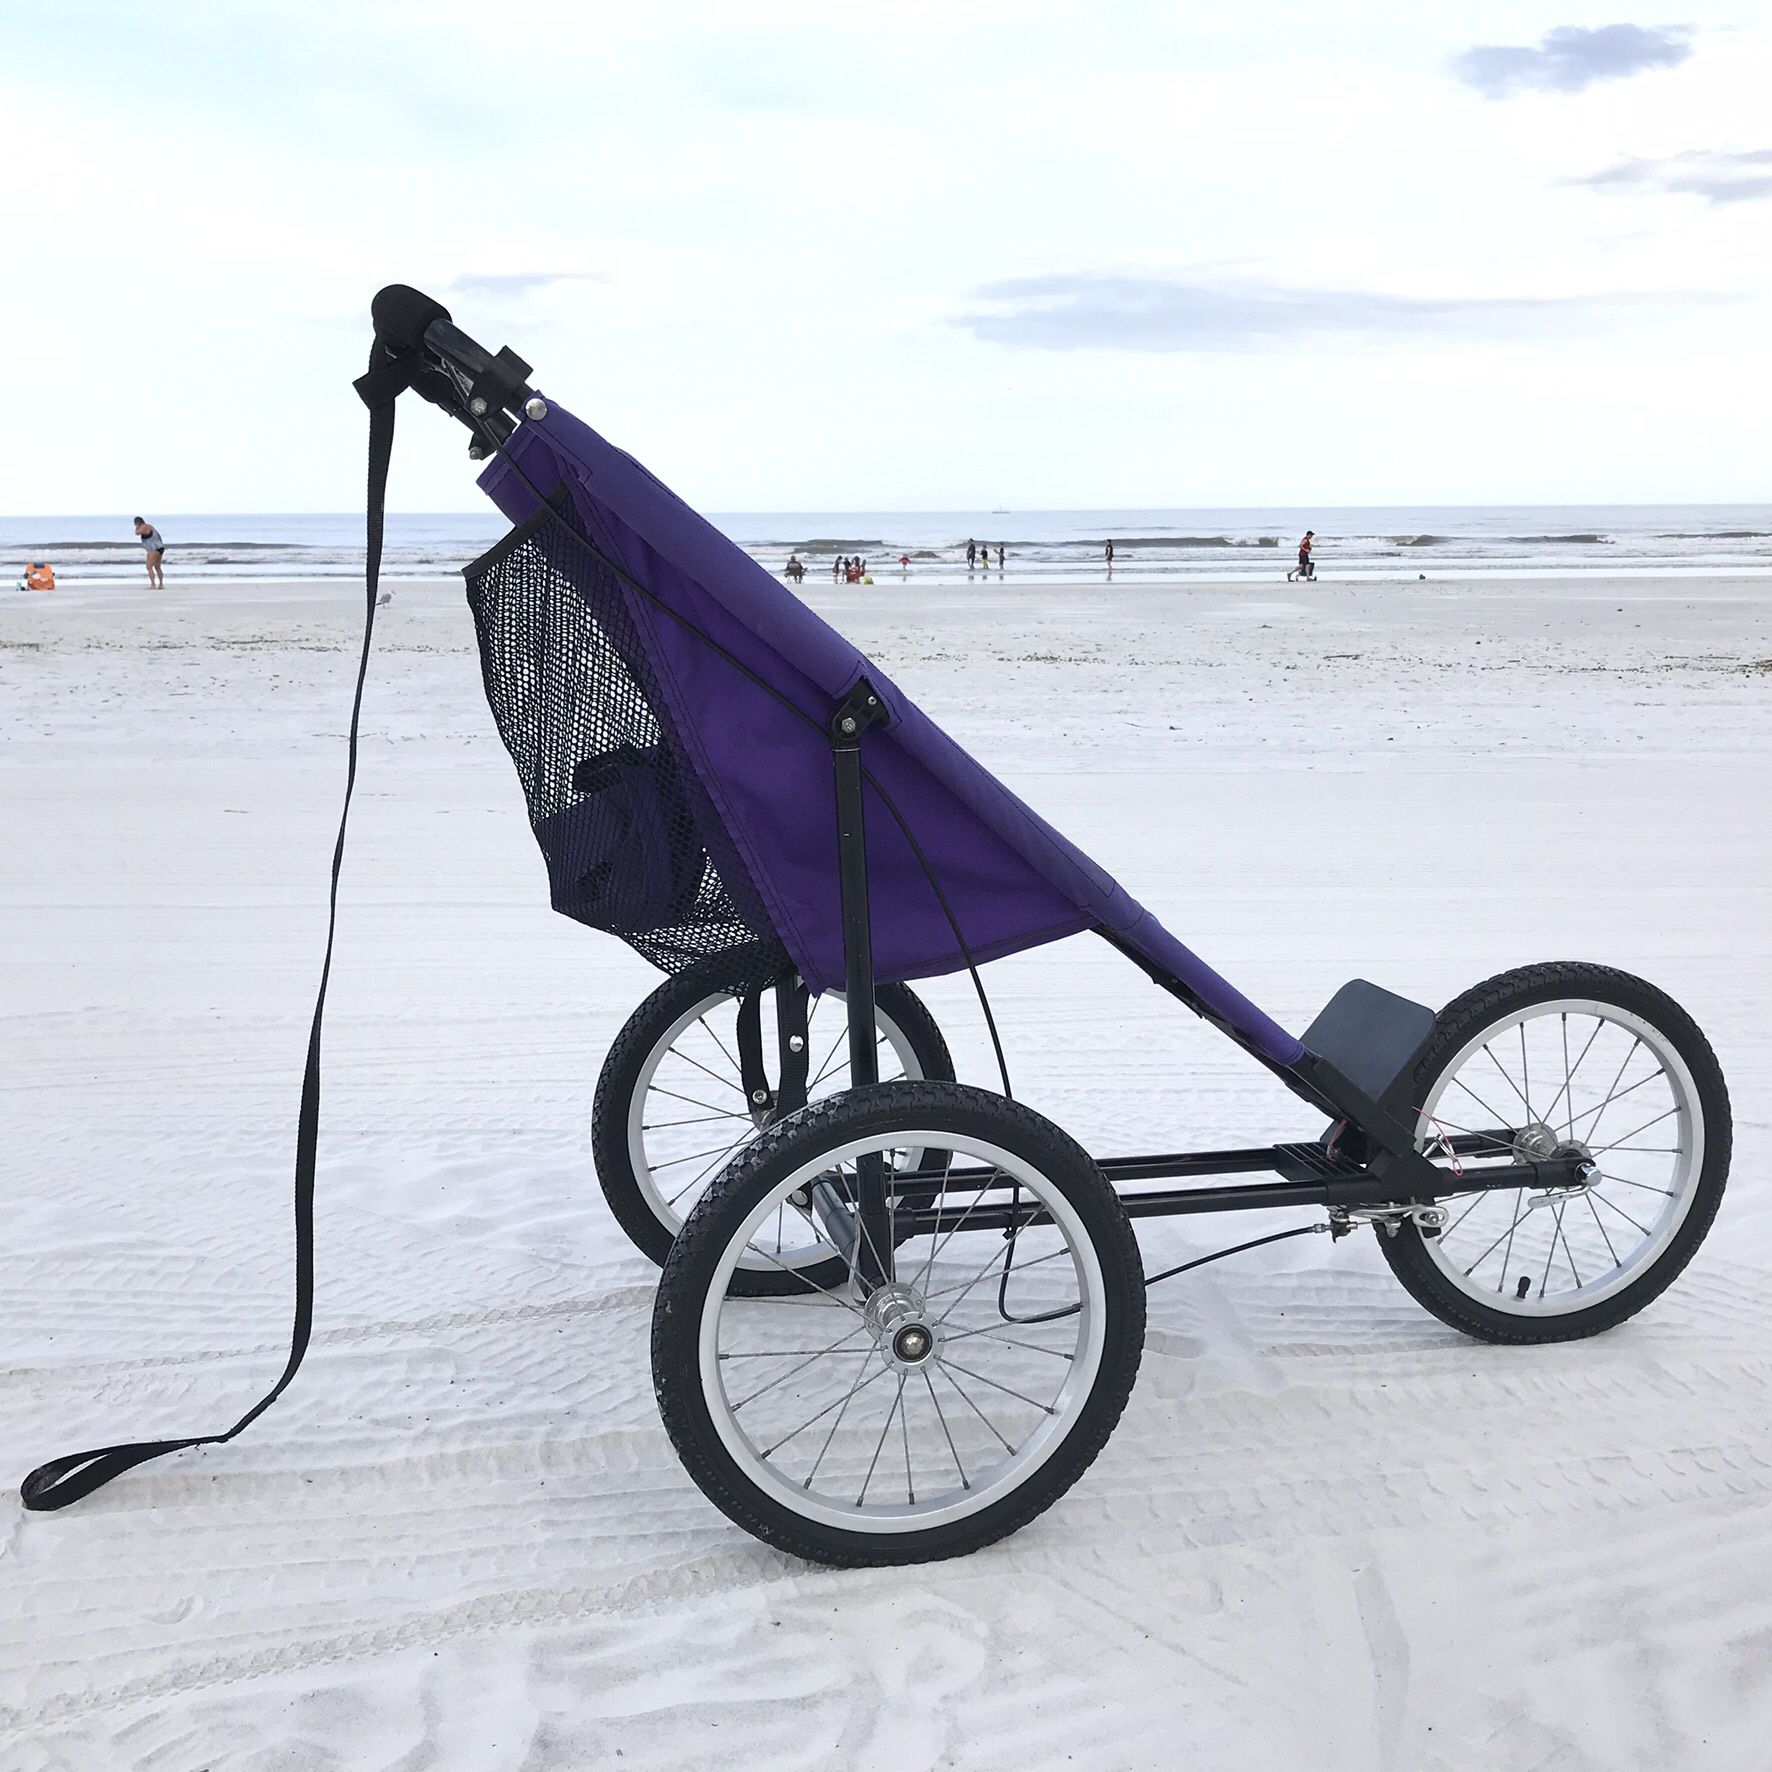 Tyr Forbløffe aflange Baby Jogger II-16 Stroller Single Purple 16” with Sunshade for Sale in  Saint AUG BEACH, FL - OfferUp